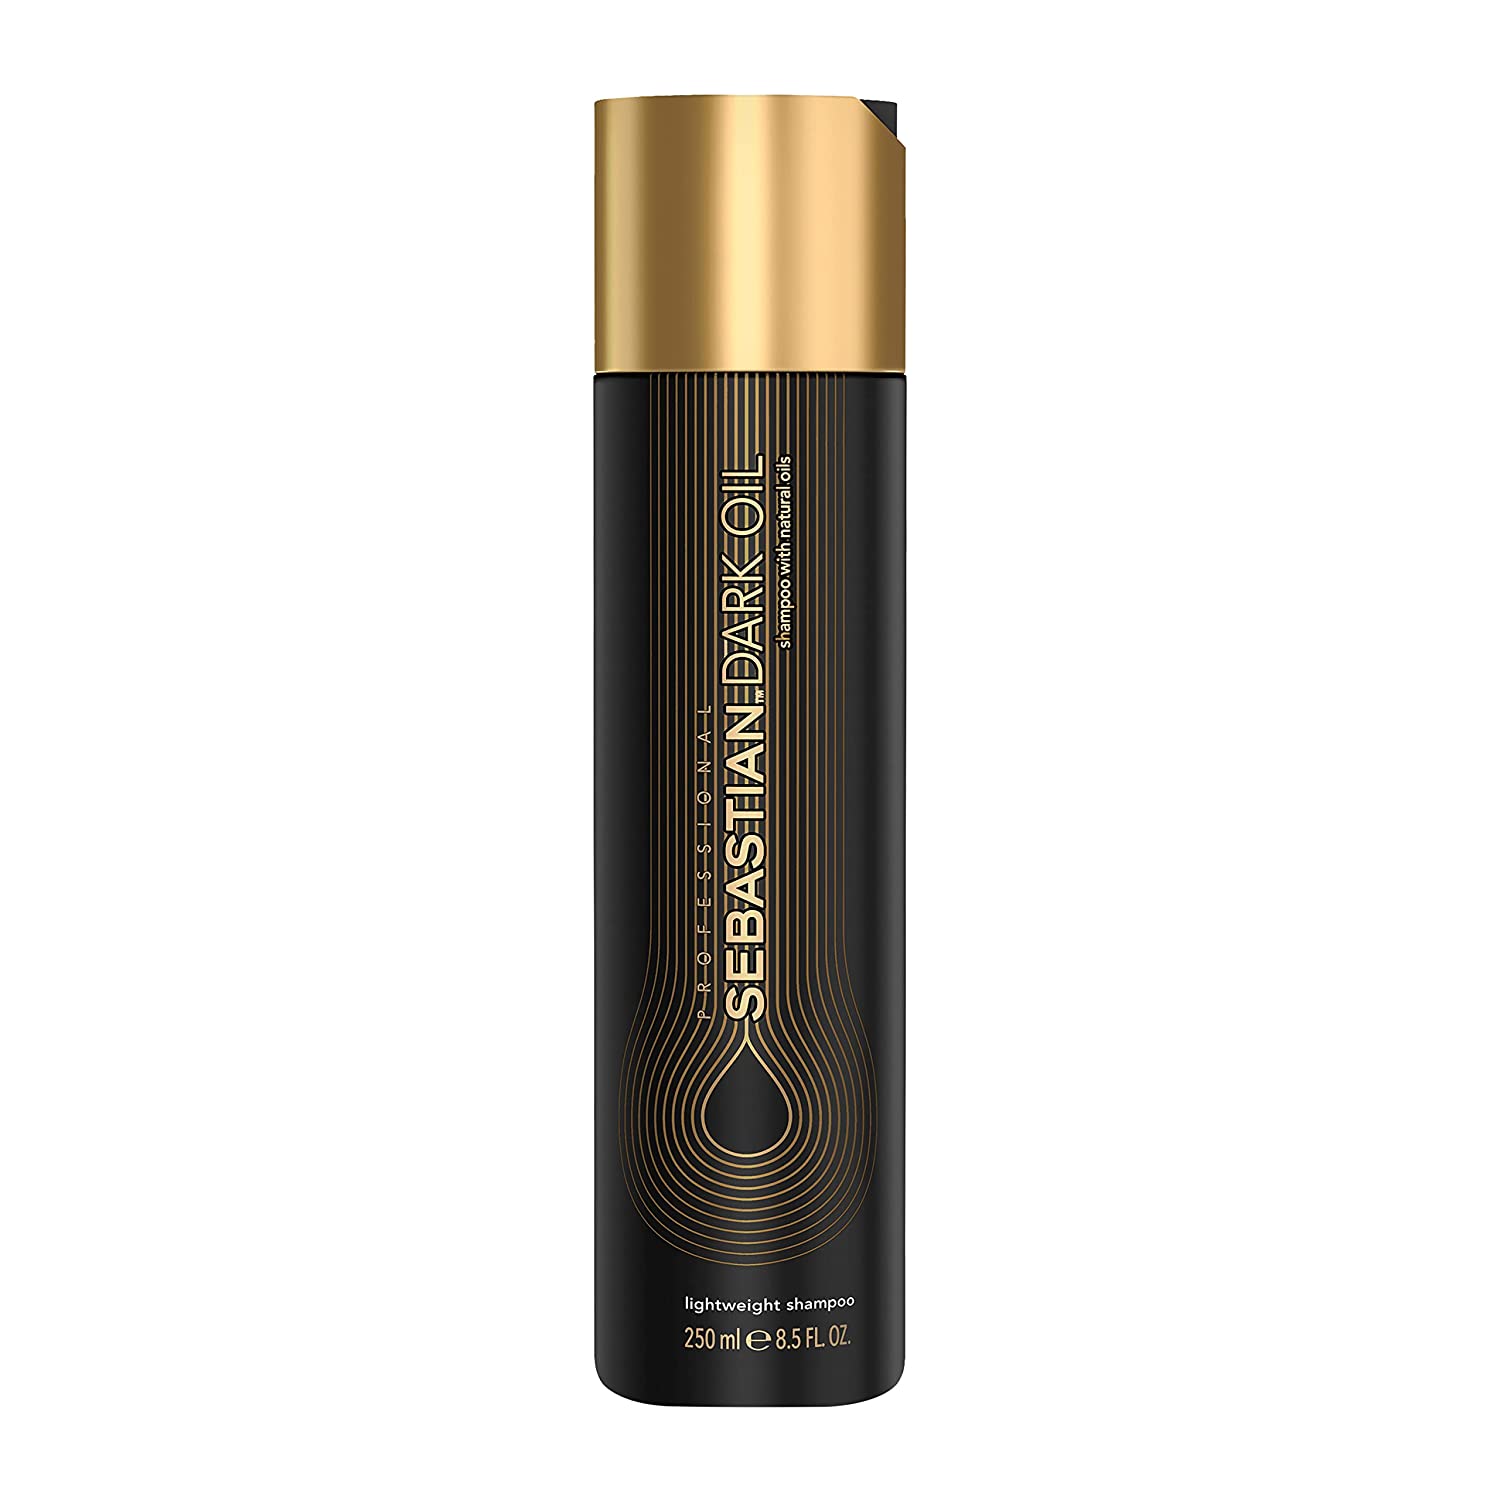 Sebastian Professional Dark Oil Weightless Shampoo | Smooths and Nourishes | Provides Volume | For All Hair Types, 250 ml, 